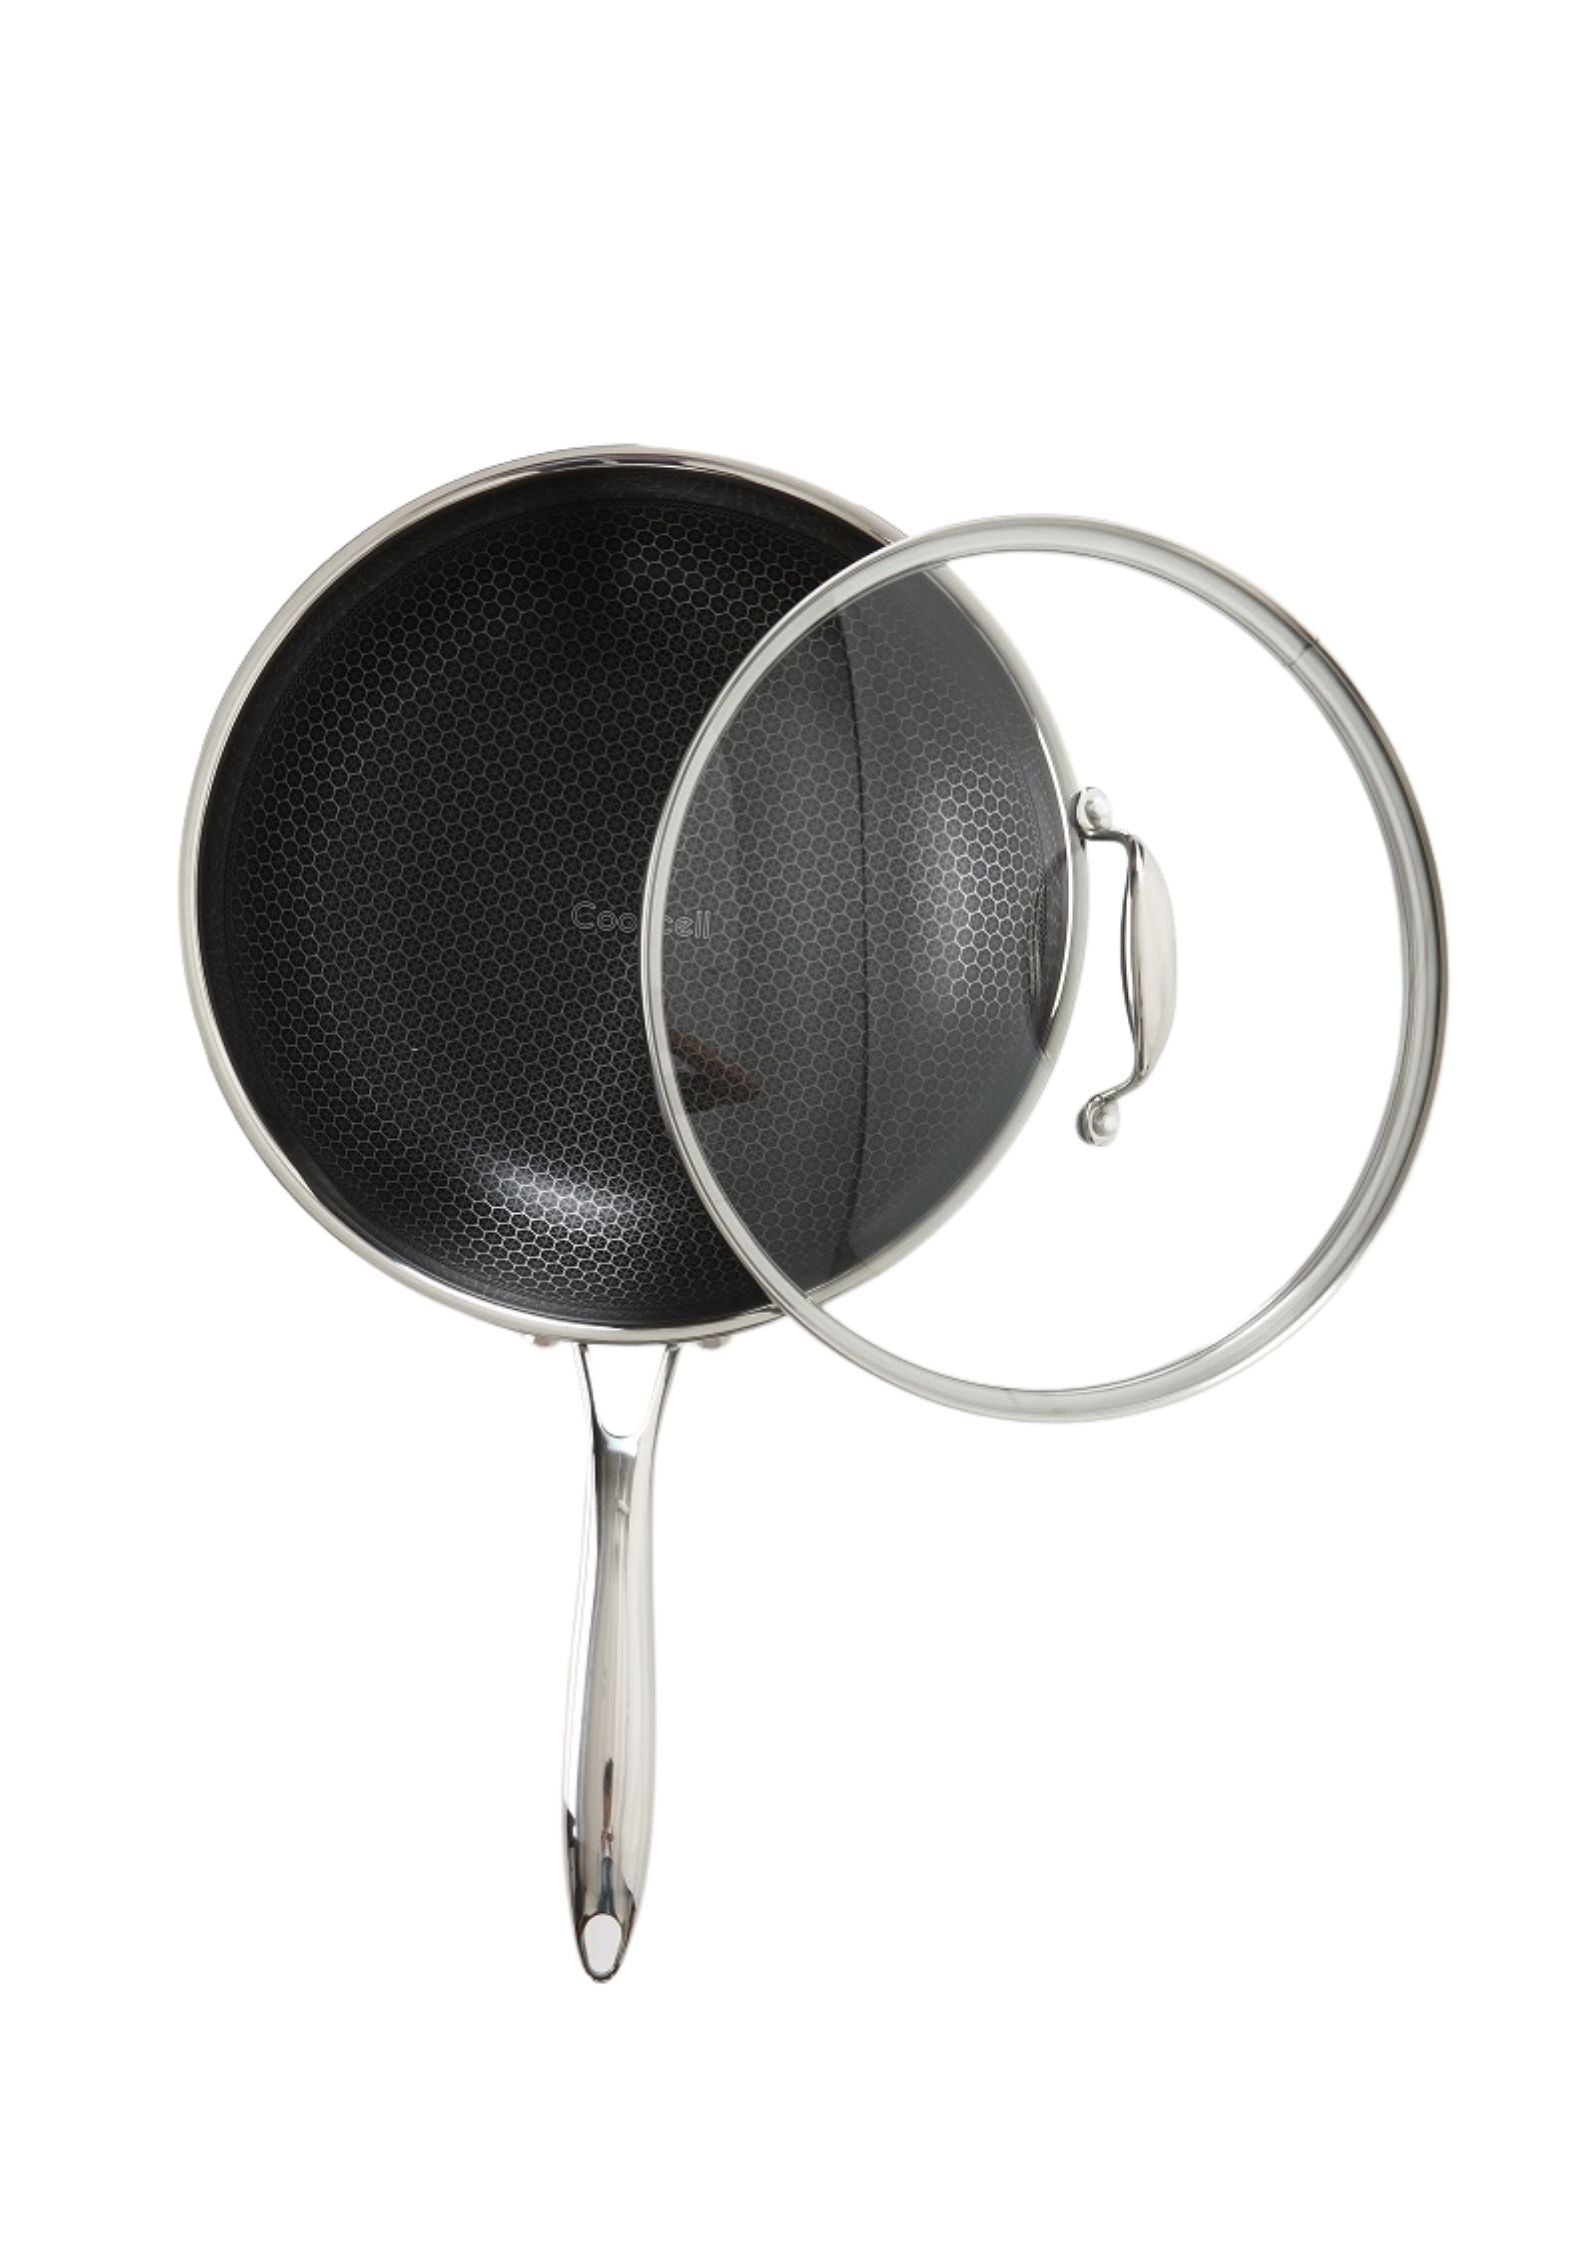 COOKCELL Stainless Steel Non-stick Hybrid Wok 28cm